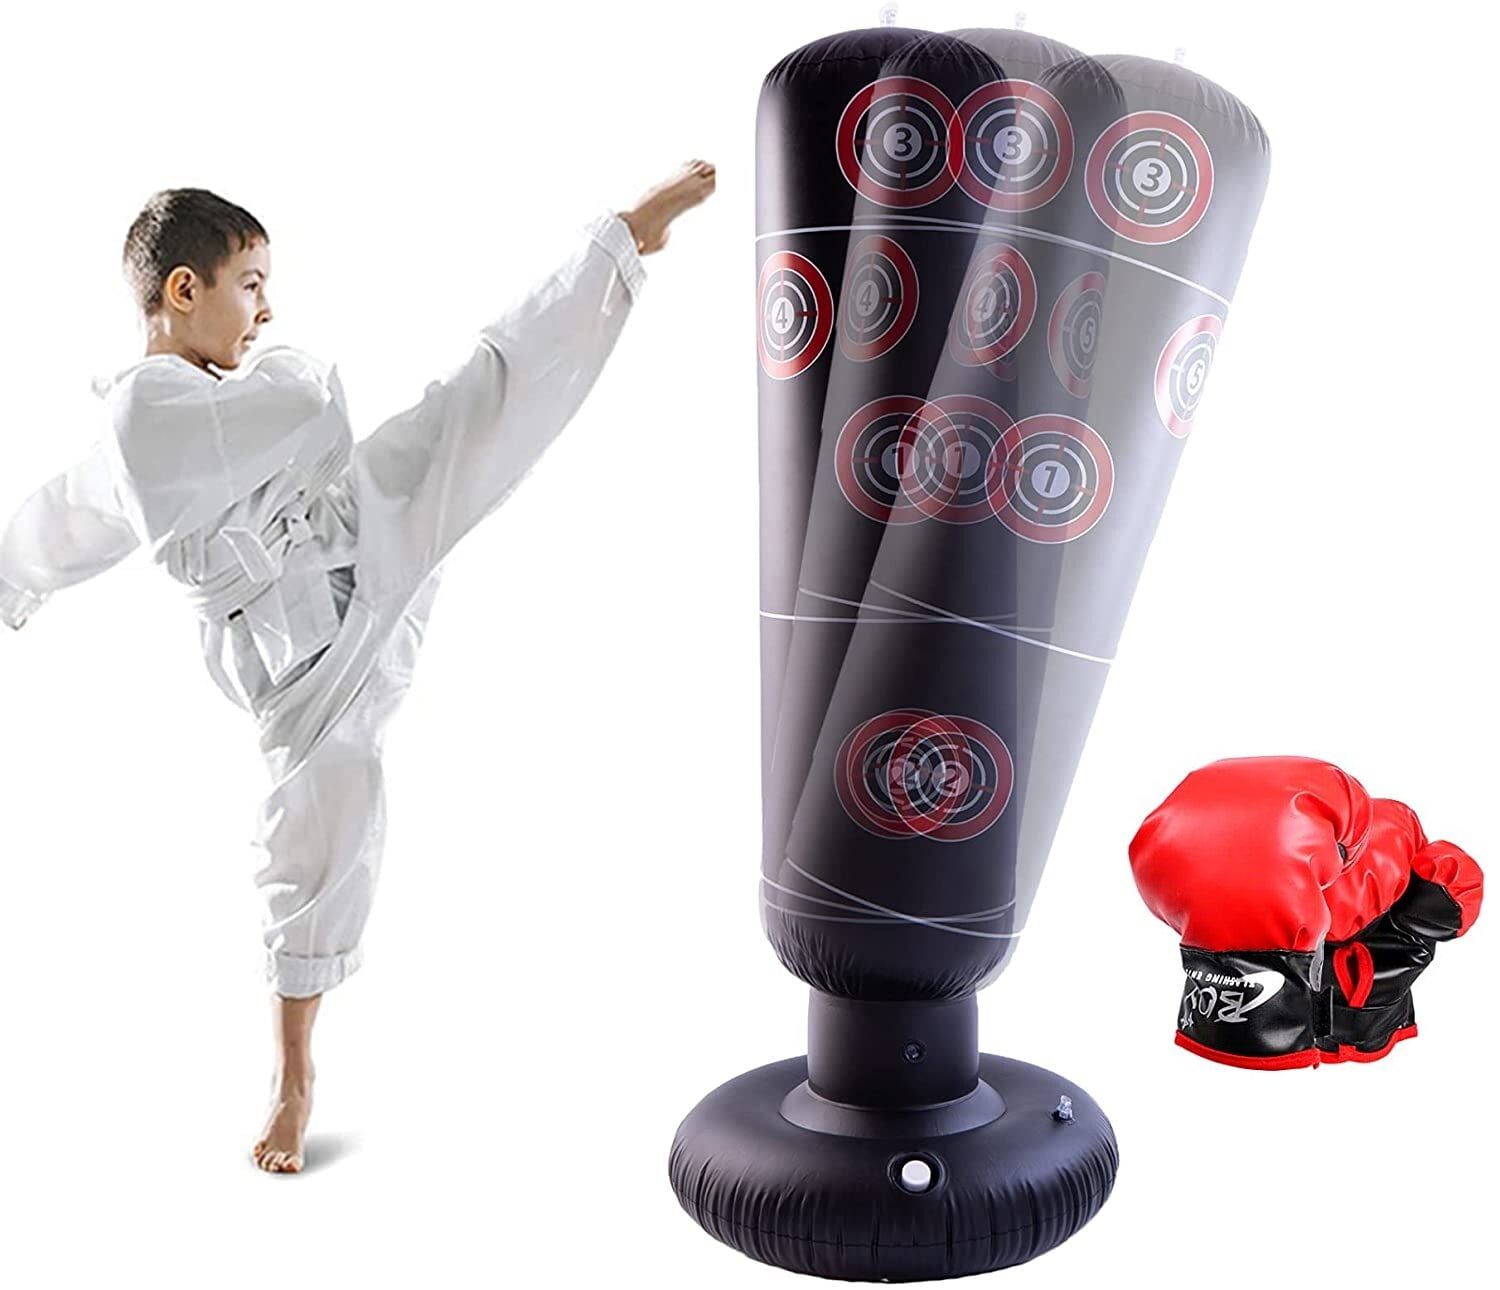 UK 160cm Free Standing Inflatable Boxing Punch Bag Kick MMA Training Kids Adult 